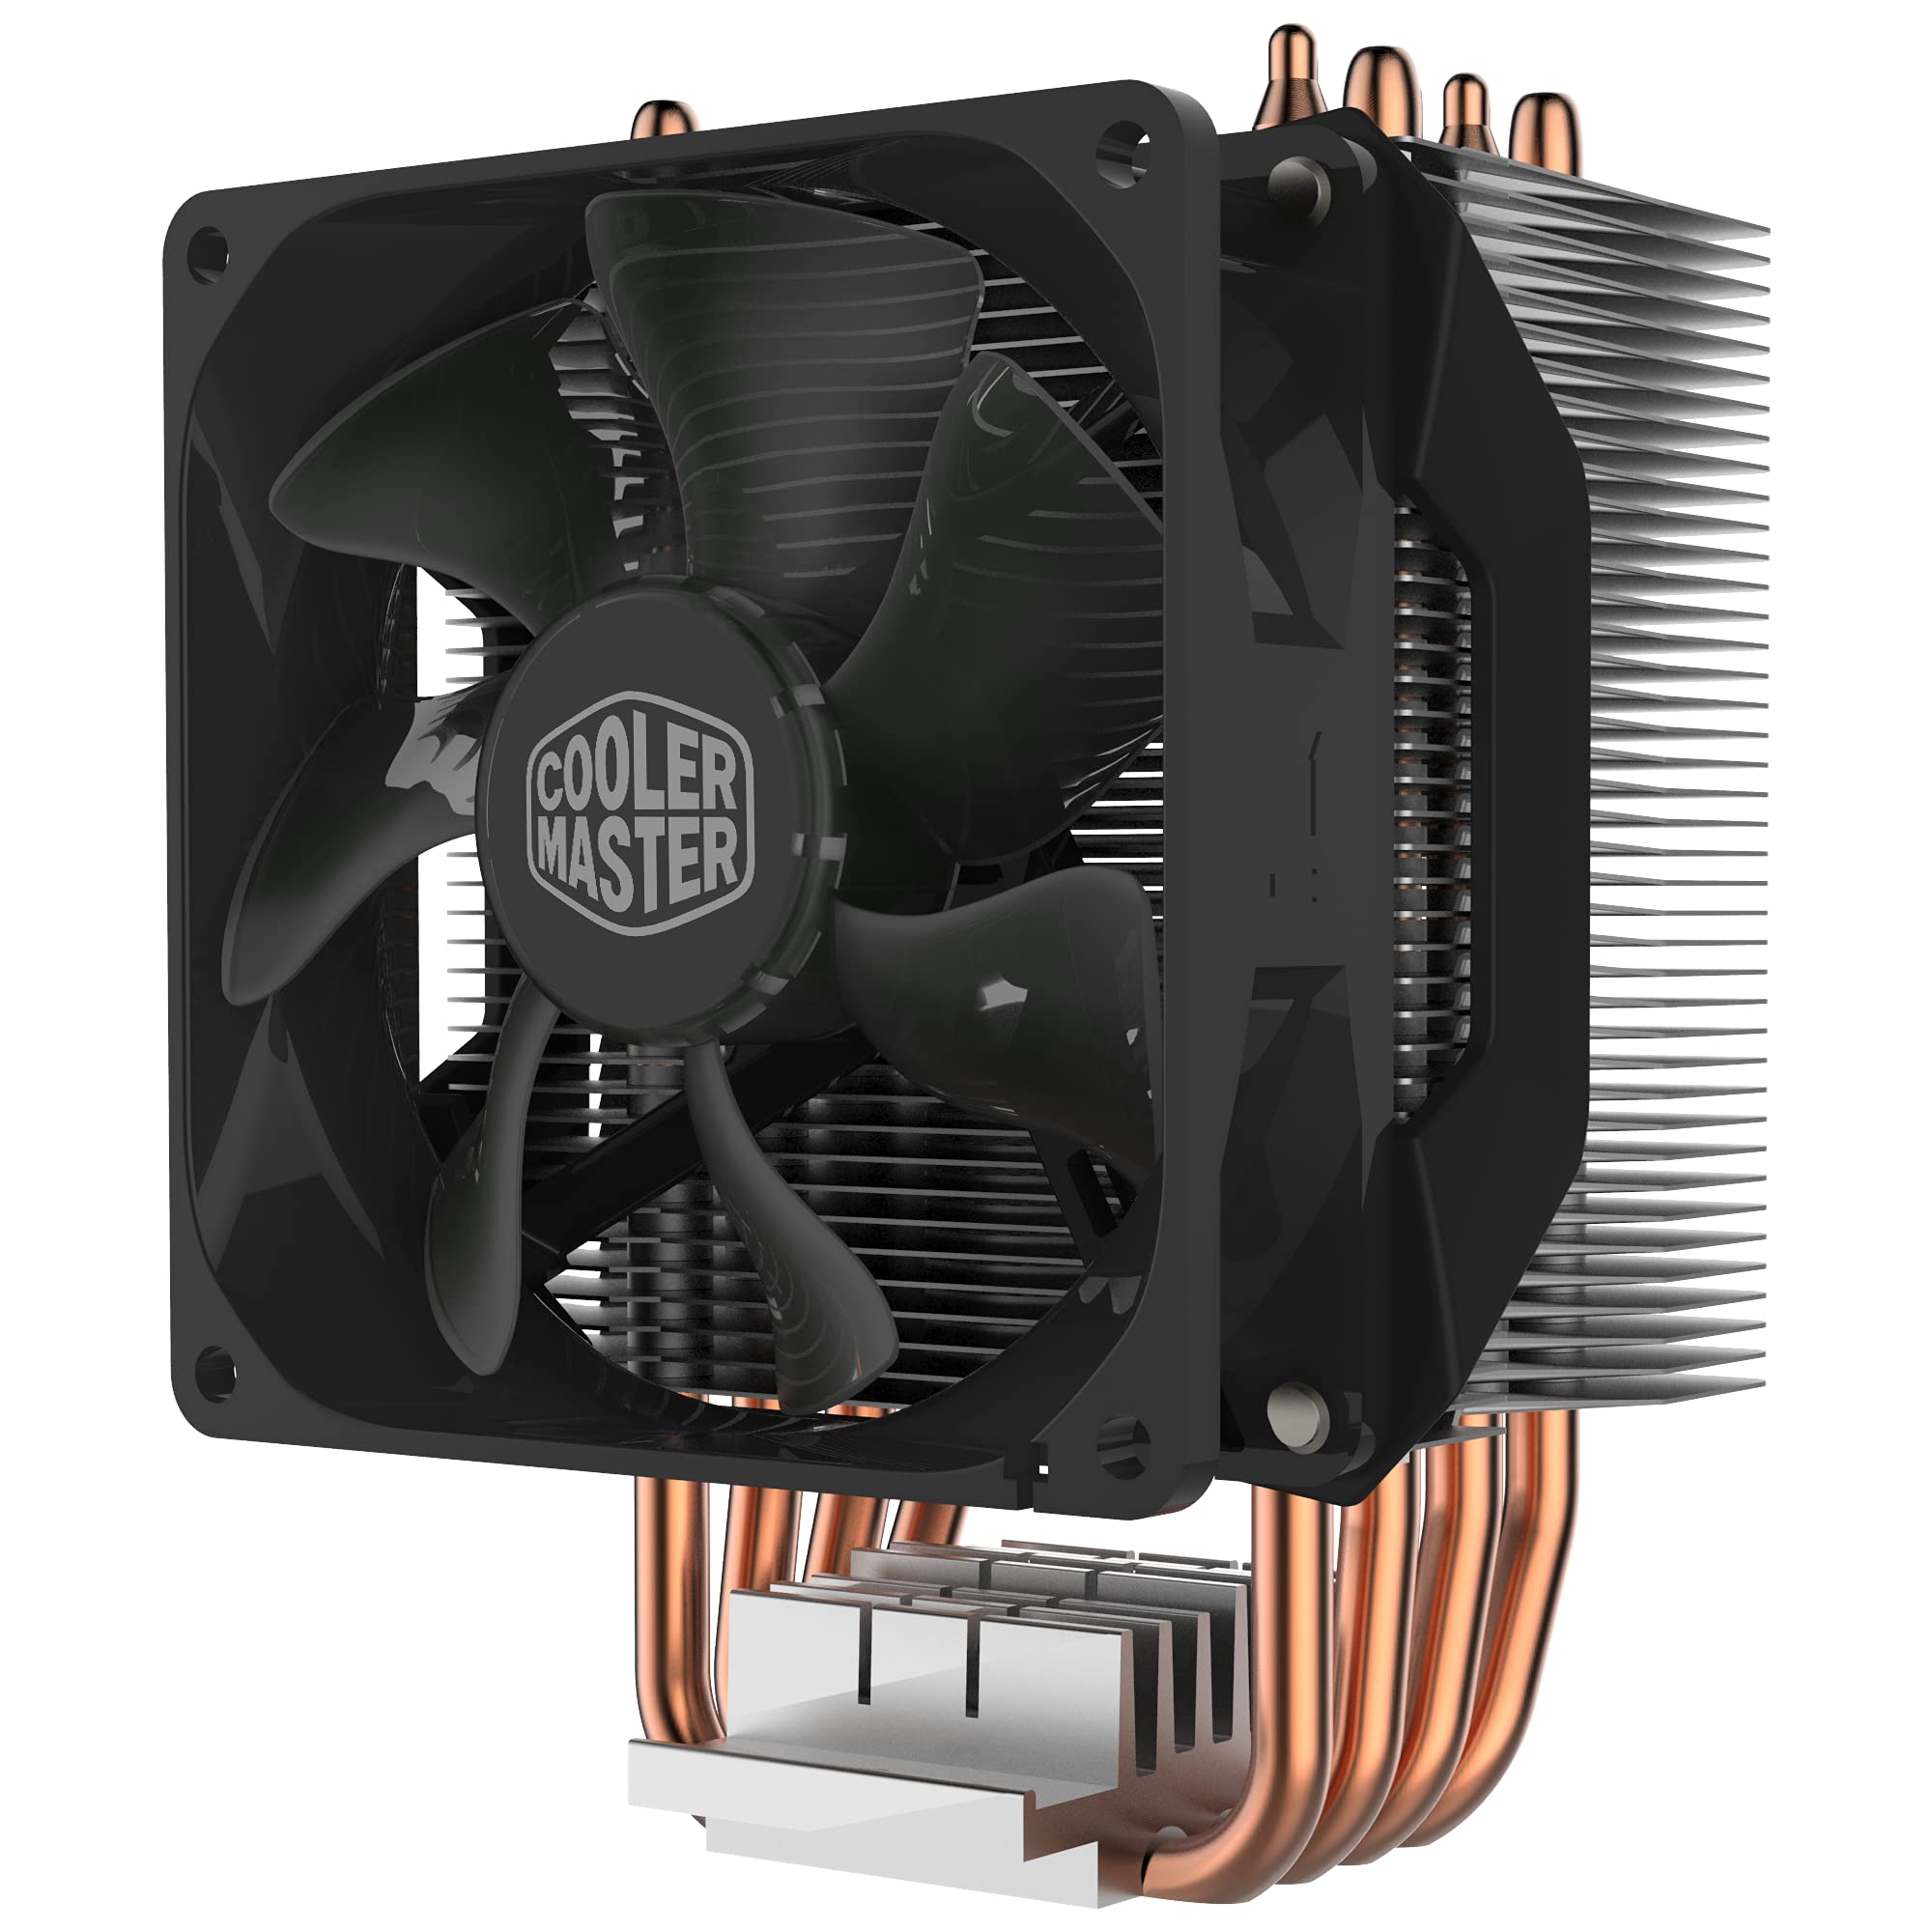 Cooler Master Hyper H412R CPU Air Cooler - Low-Profile Cooling System, Direct Contact Technology, 4 Copper Heat Pipes, Compact Aluminium Heatsink with 92mm PWM Fan - AMD & Intel Compatible